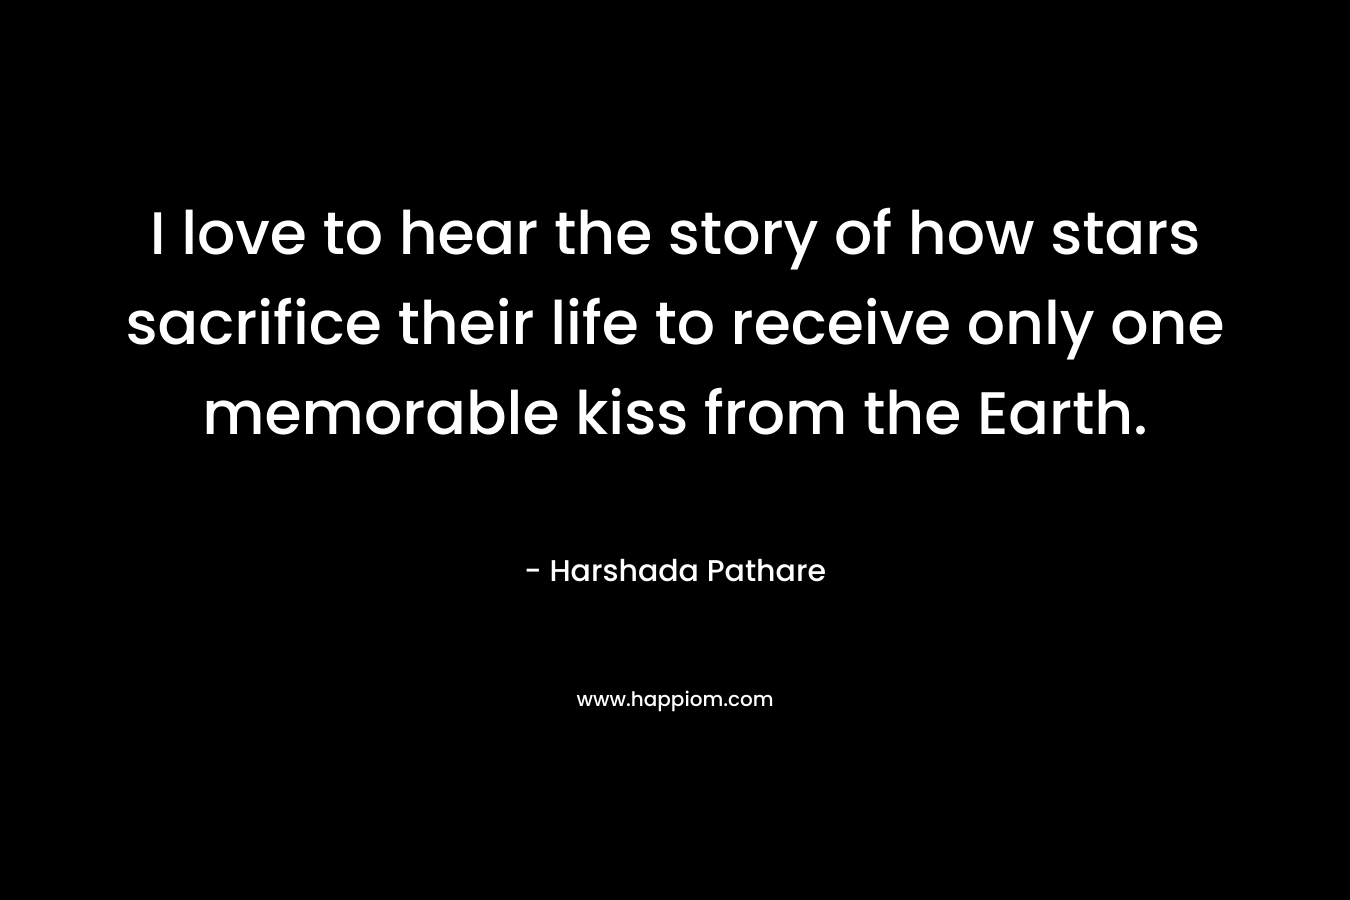 I love to hear the story of how stars sacrifice their life to receive only one memorable kiss from the Earth.